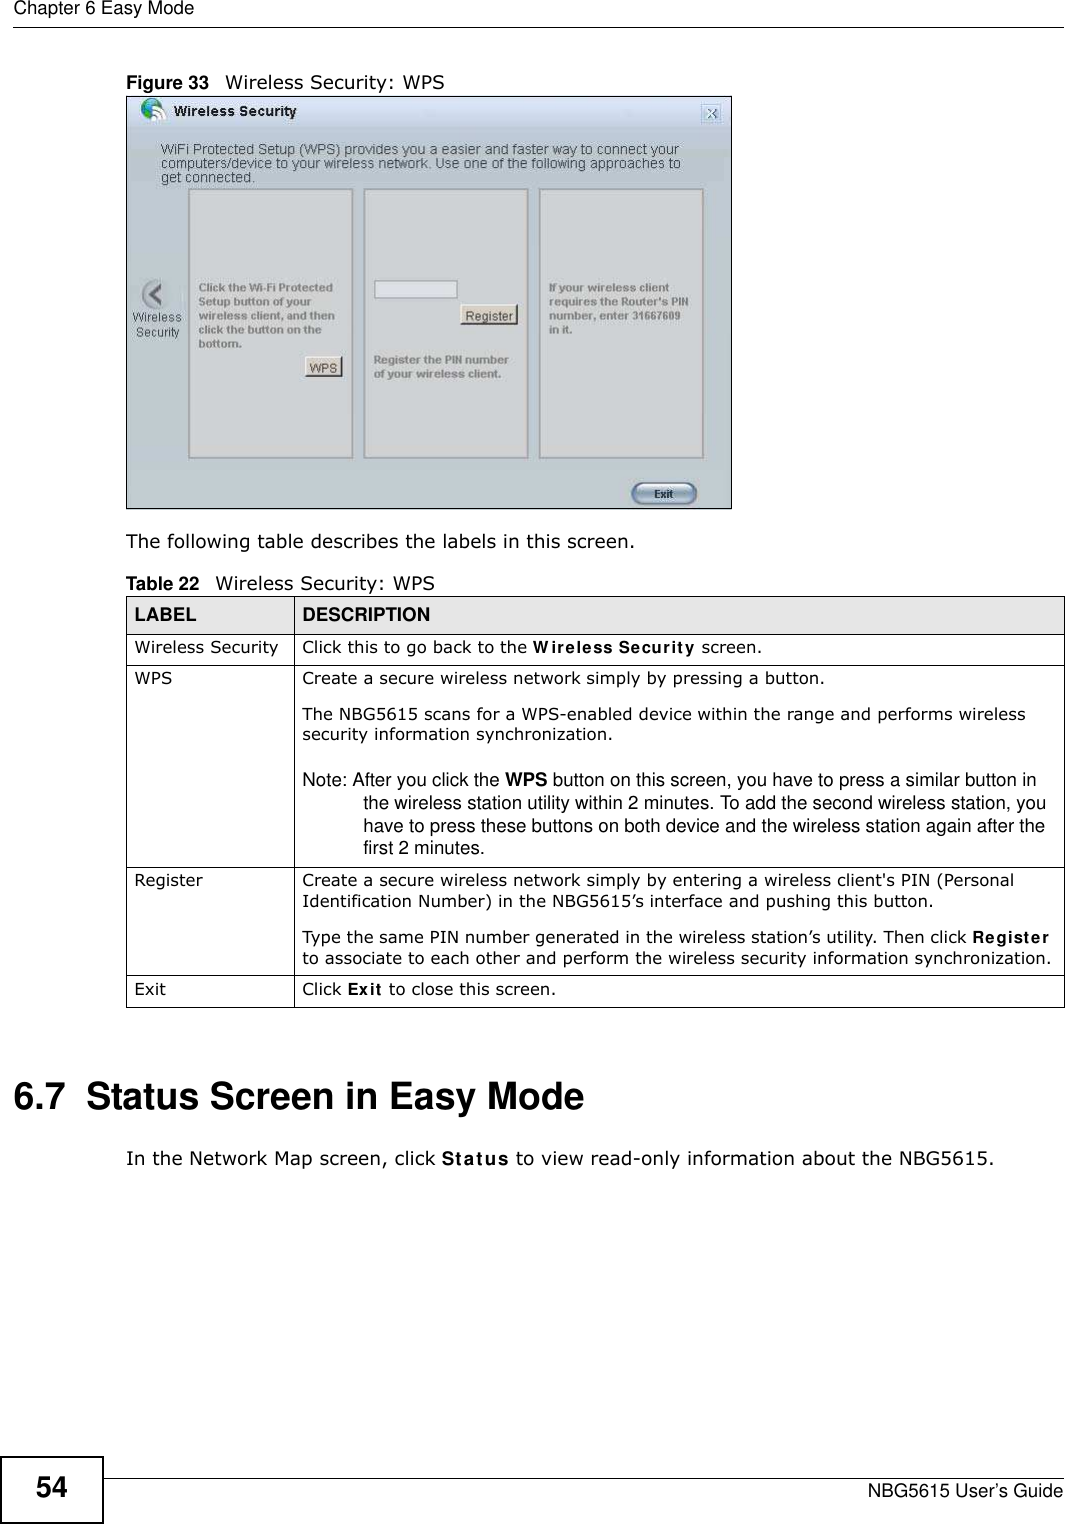 Chapter 6 Easy ModeNBG5615 User’s Guide54Figure 33   Wireless Security: WPS The following table describes the labels in this screen.6.7  Status Screen in Easy ModeIn the Network Map screen, click Status to view read-only information about the NBG5615.Table 22   Wireless Security: WPSLABEL DESCRIPTIONWireless Security Click this to go back to the W ireless Security screen.WPS Create a secure wireless network simply by pressing a button. The NBG5615 scans for a WPS-enabled device within the range and performs wireless security information synchronization. Note: After you click the WPS button on this screen, you have to press a similar button in the wireless station utility within 2 minutes. To add the second wireless station, you have to press these buttons on both device and the wireless station again after the first 2 minutes.Register Create a secure wireless network simply by entering a wireless client&apos;s PIN (Personal Identification Number) in the NBG5615’s interface and pushing this button.Type the same PIN number generated in the wireless station’s utility. Then click Register to associate to each other and perform the wireless security information synchronization.Exit Click Exit to close this screen.